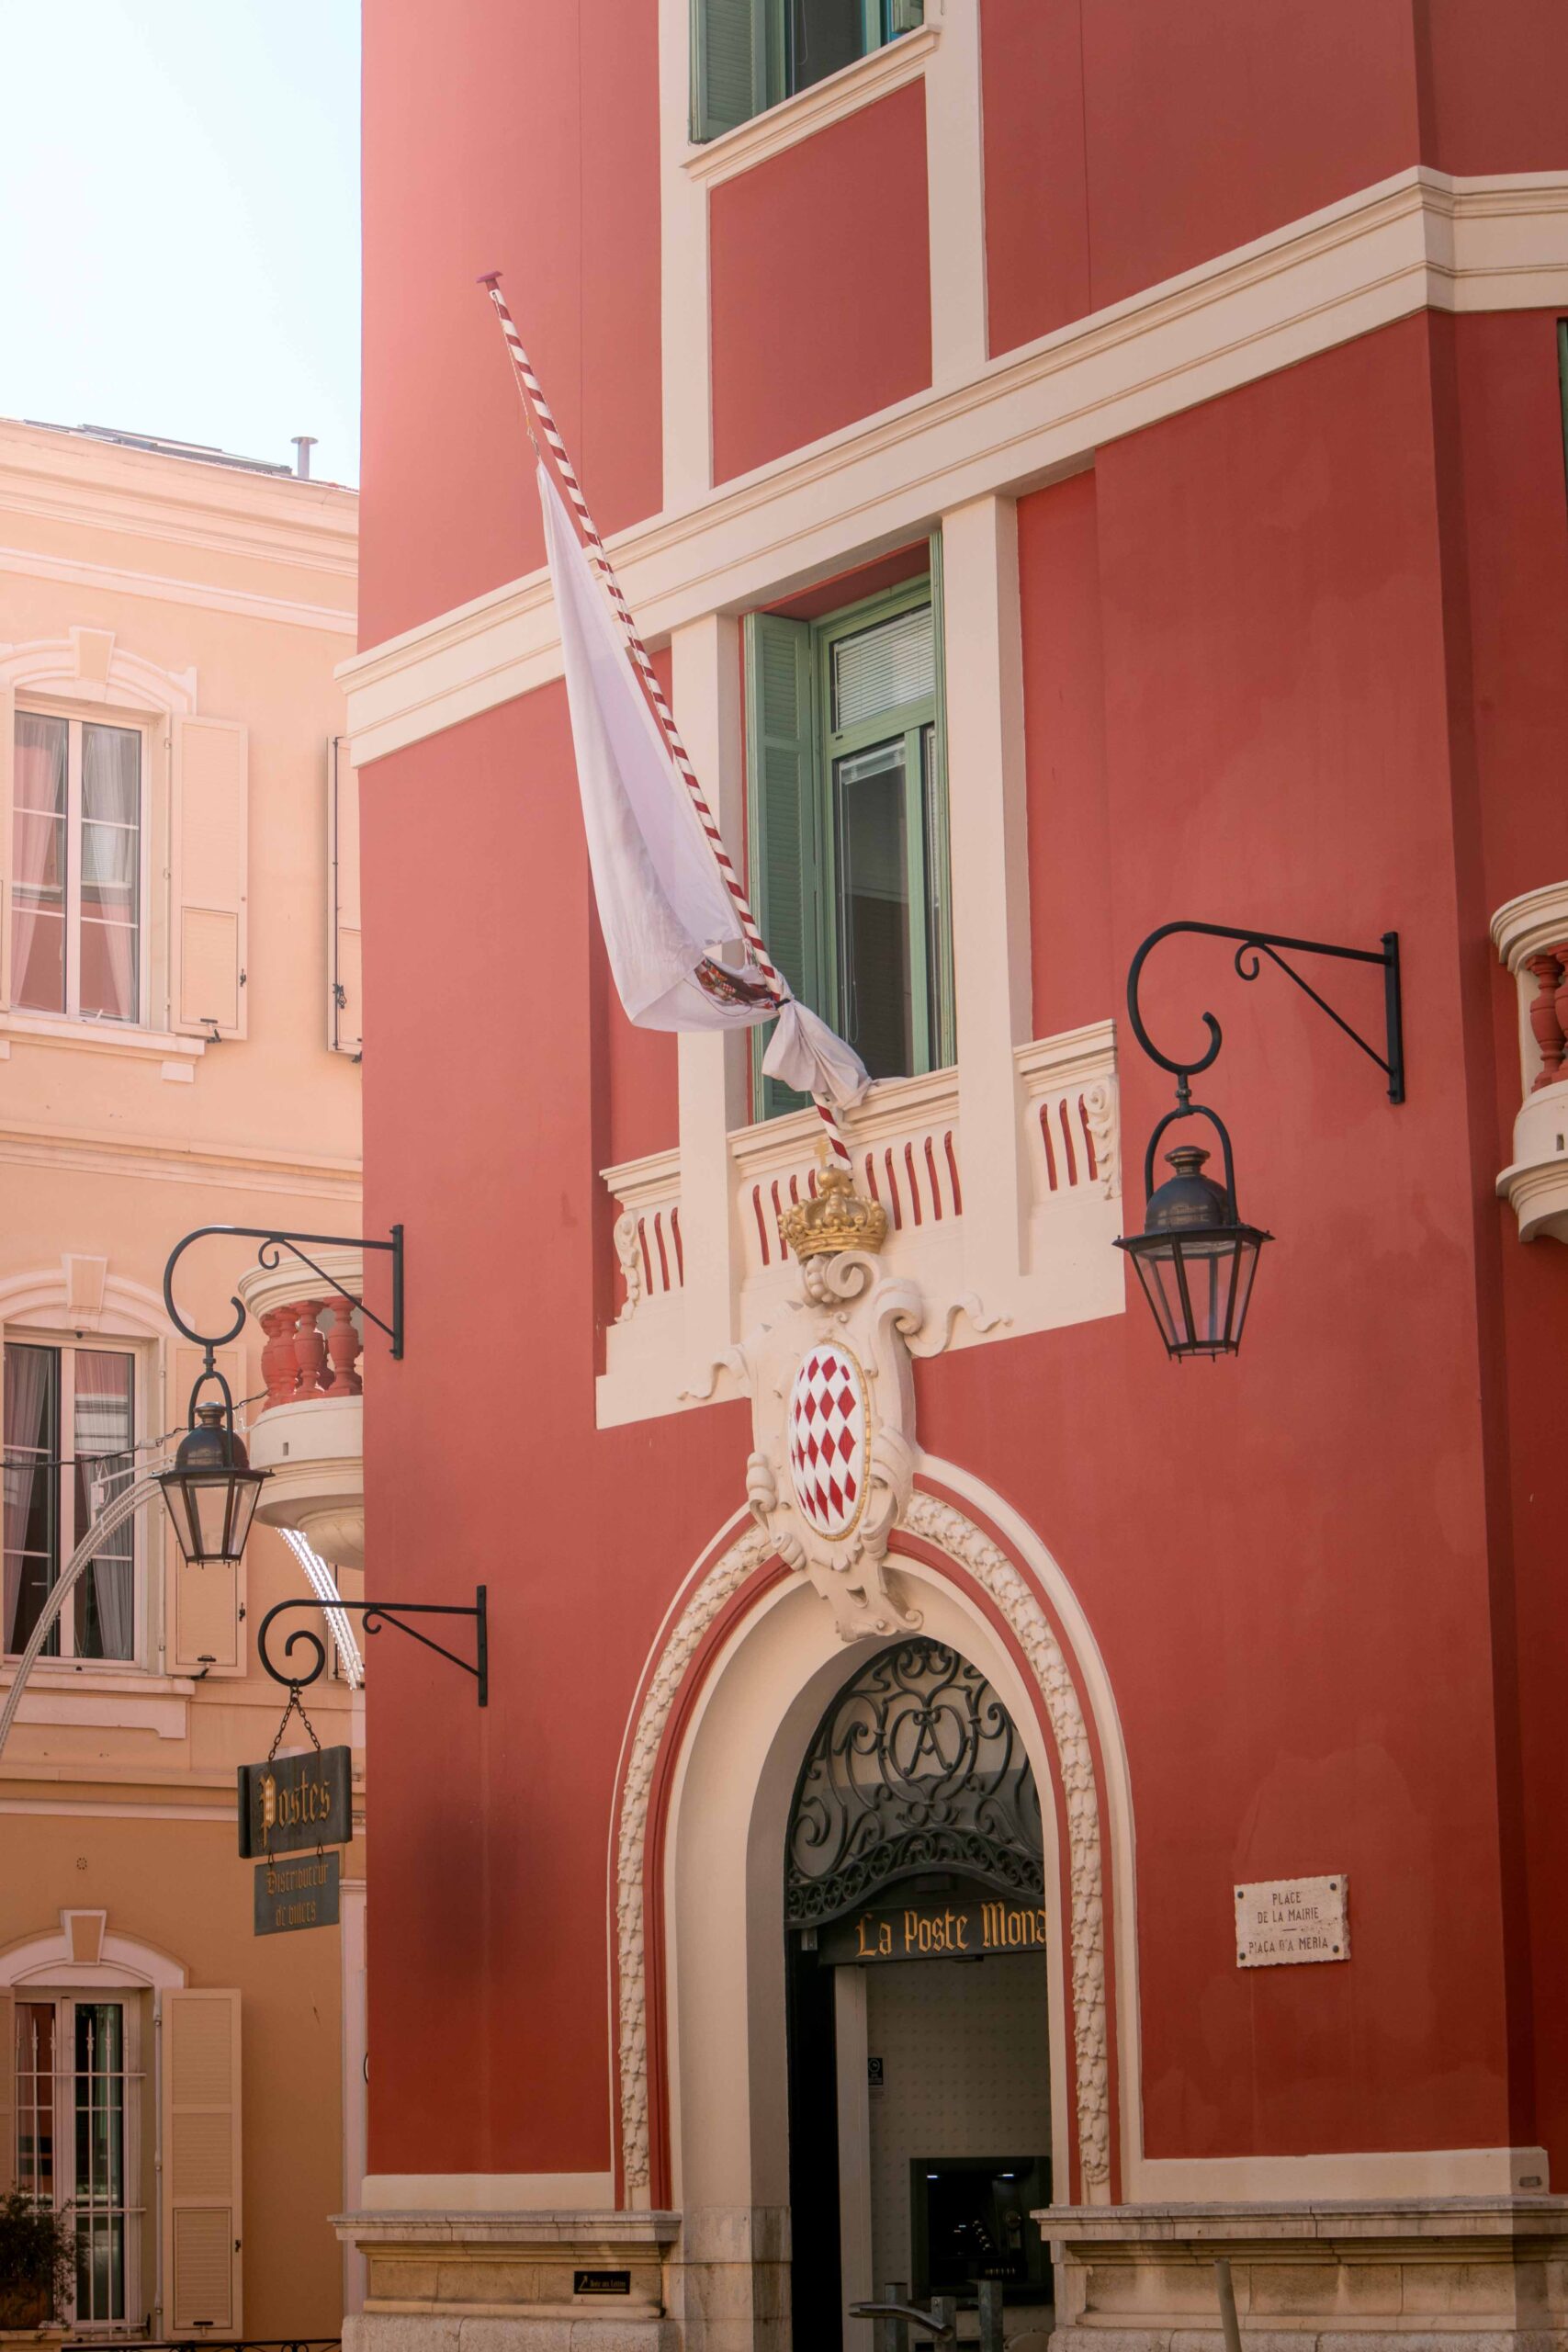 Details of the red facade building of the post office in the Old Town of Monaco, located on The Rock ("Le Rocher") in Monaco